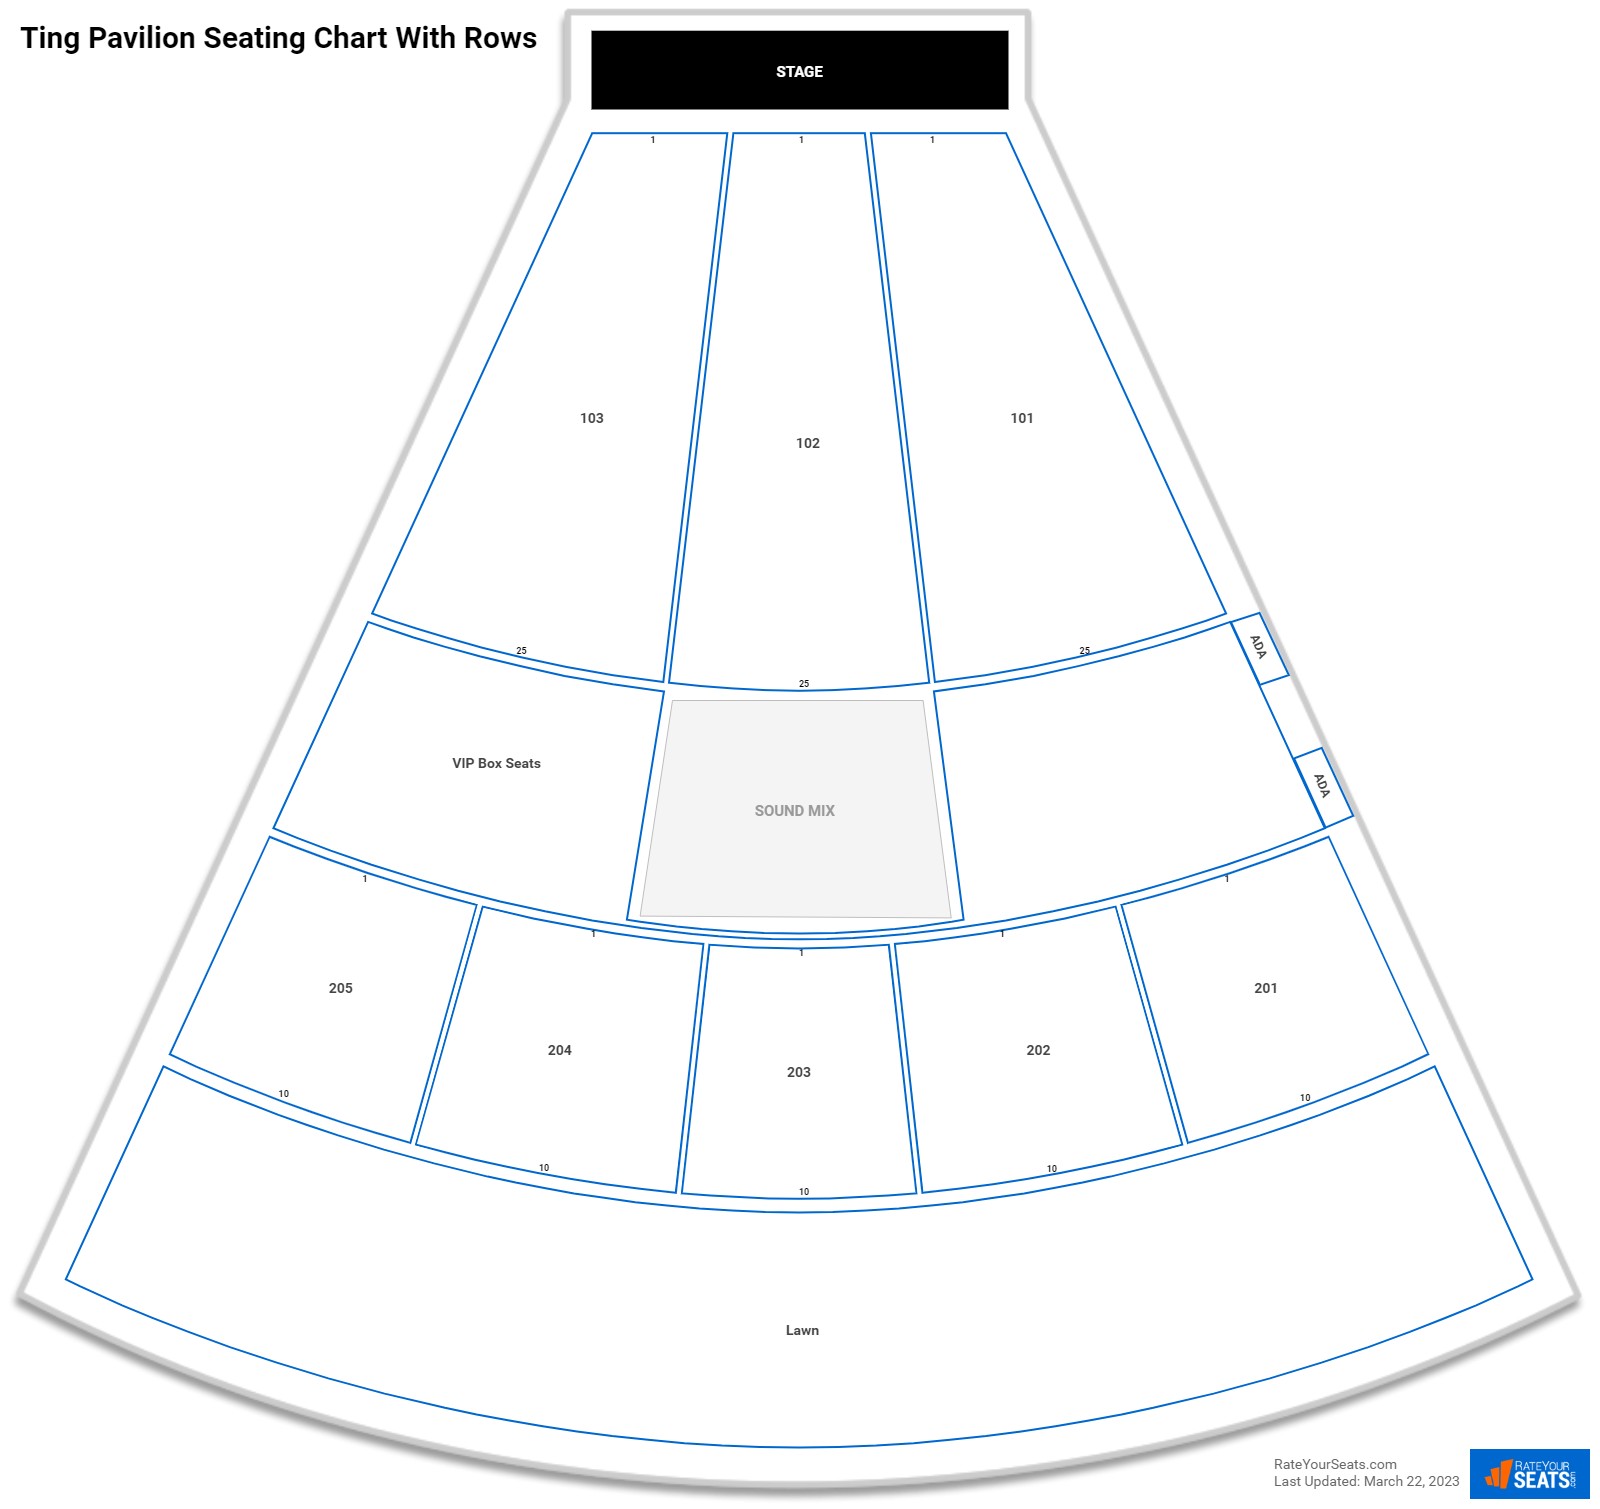 Ting Pavilion seating chart with row numbers